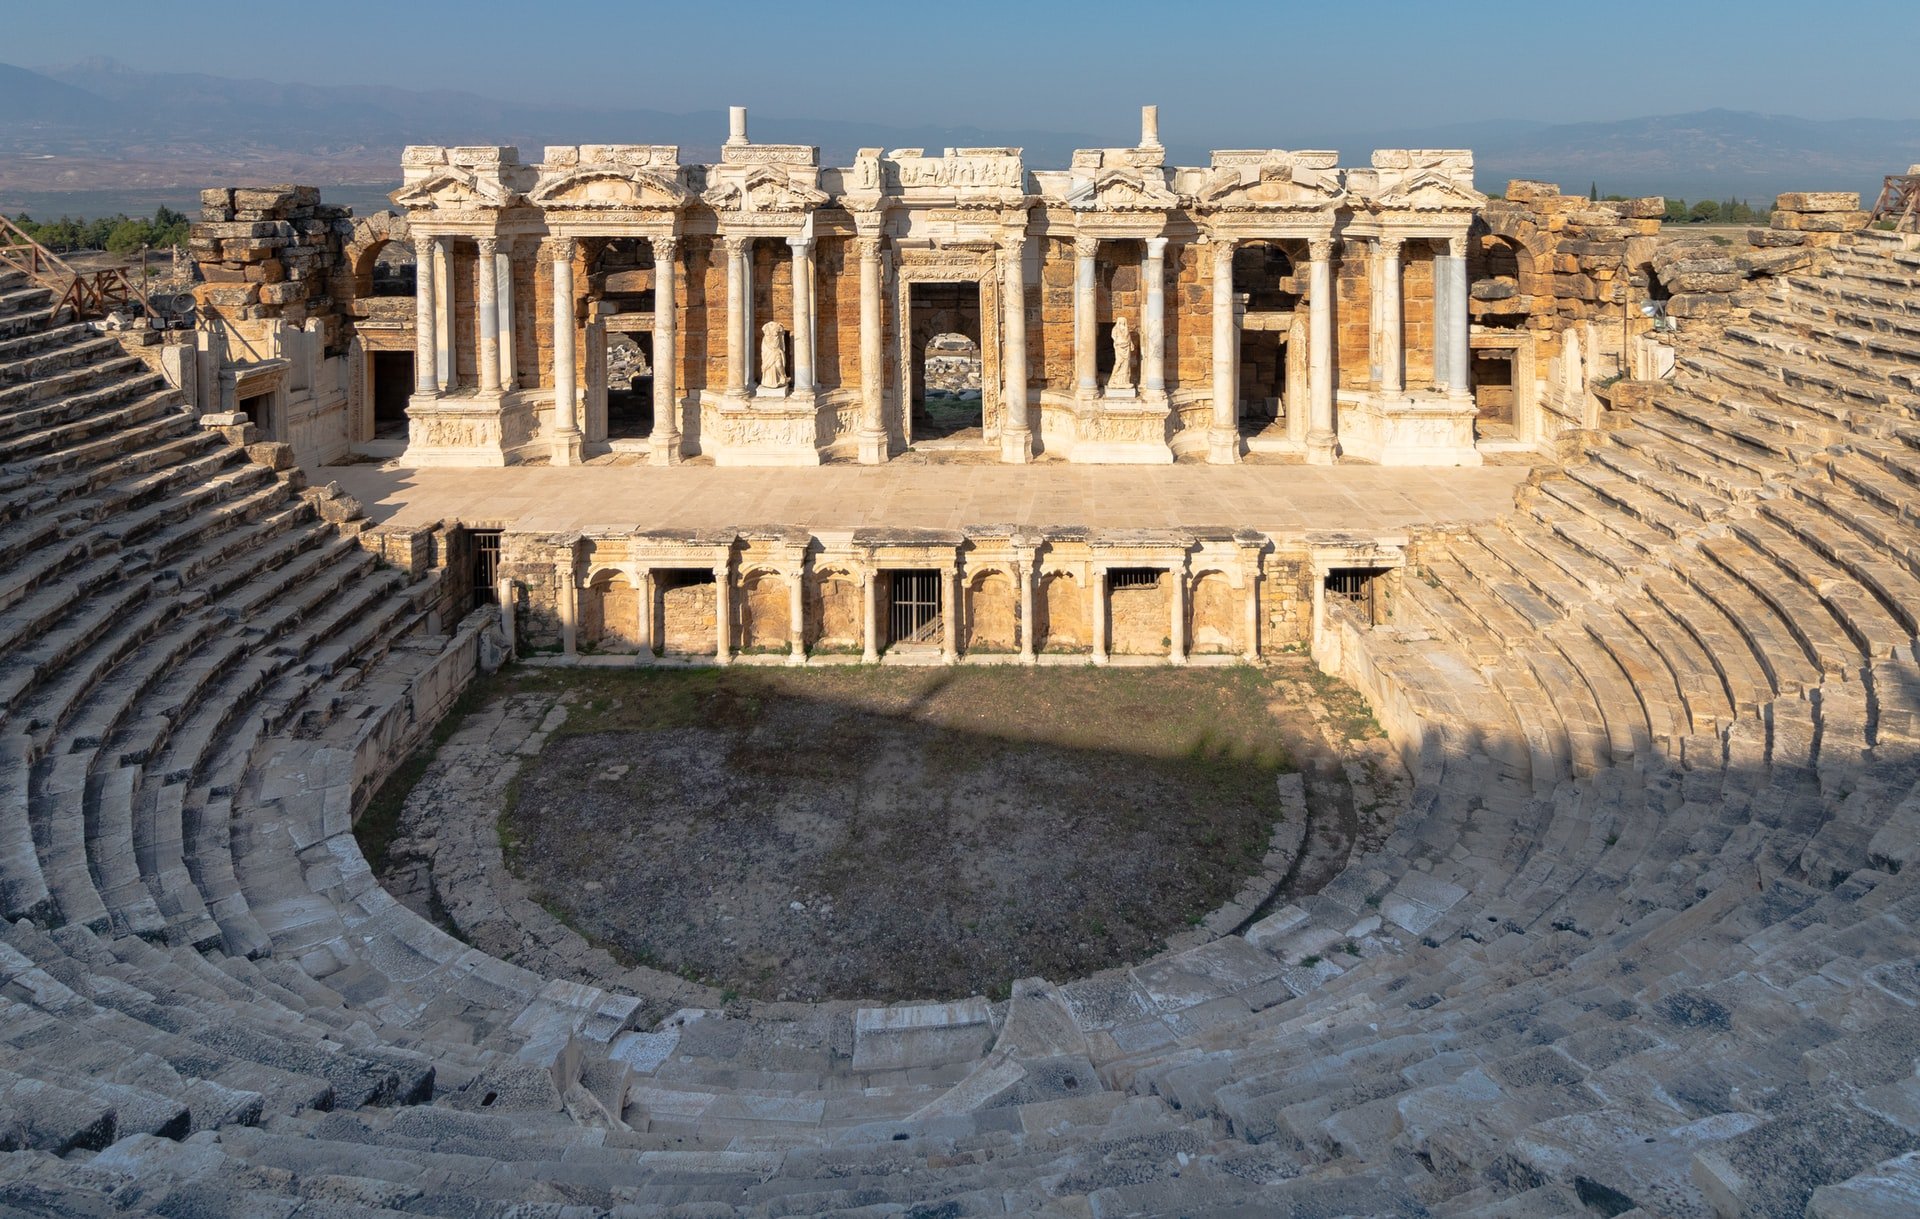 This is a panoramic shot of the ancient theater in Hierapolis, Turkey.